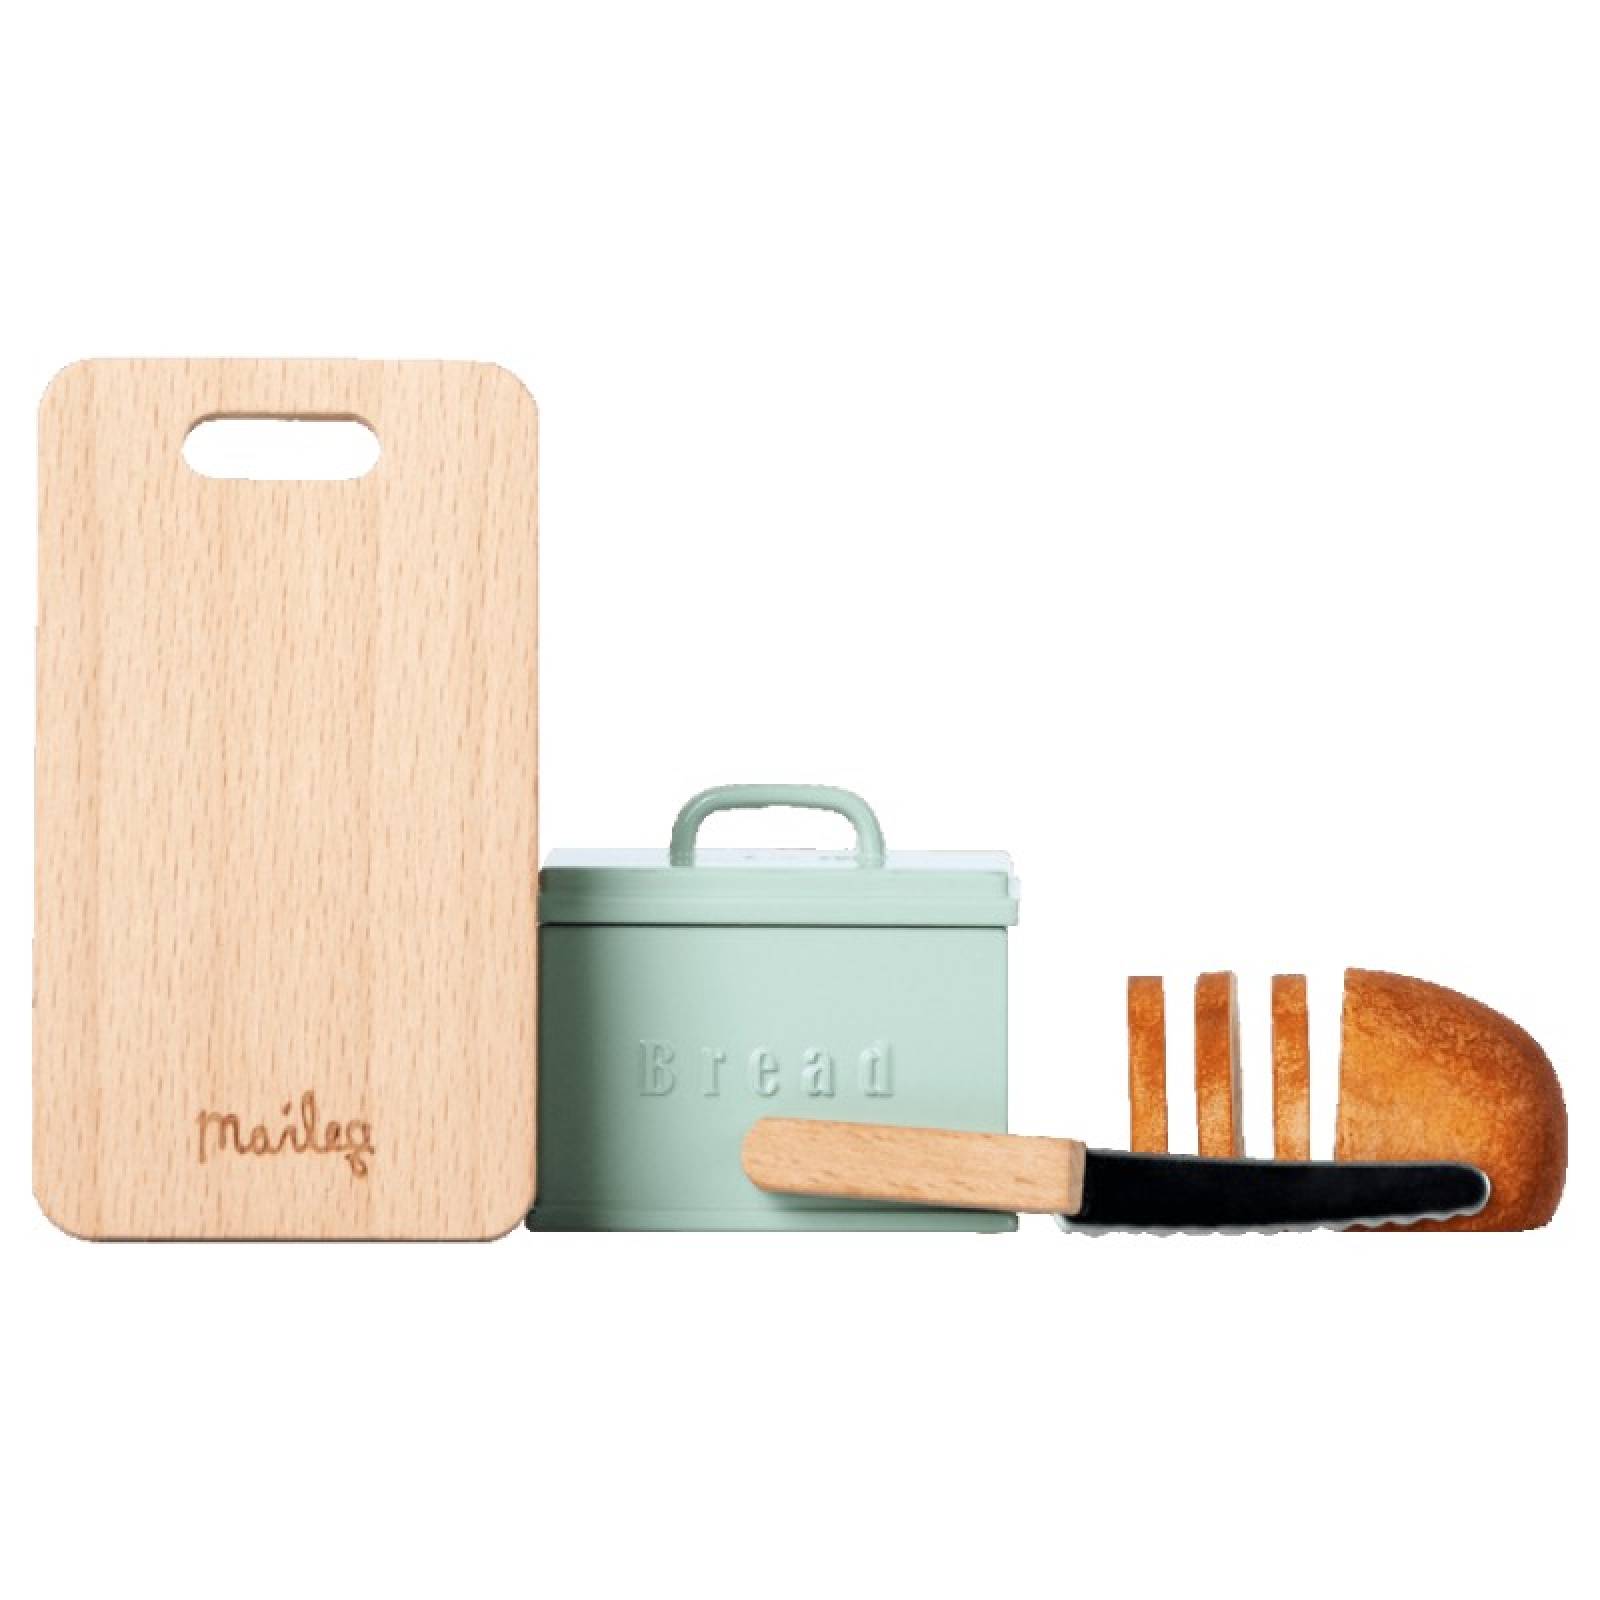 Miniature Toy Bread Box With Board And Knife By Maileg 3+ thumbnails